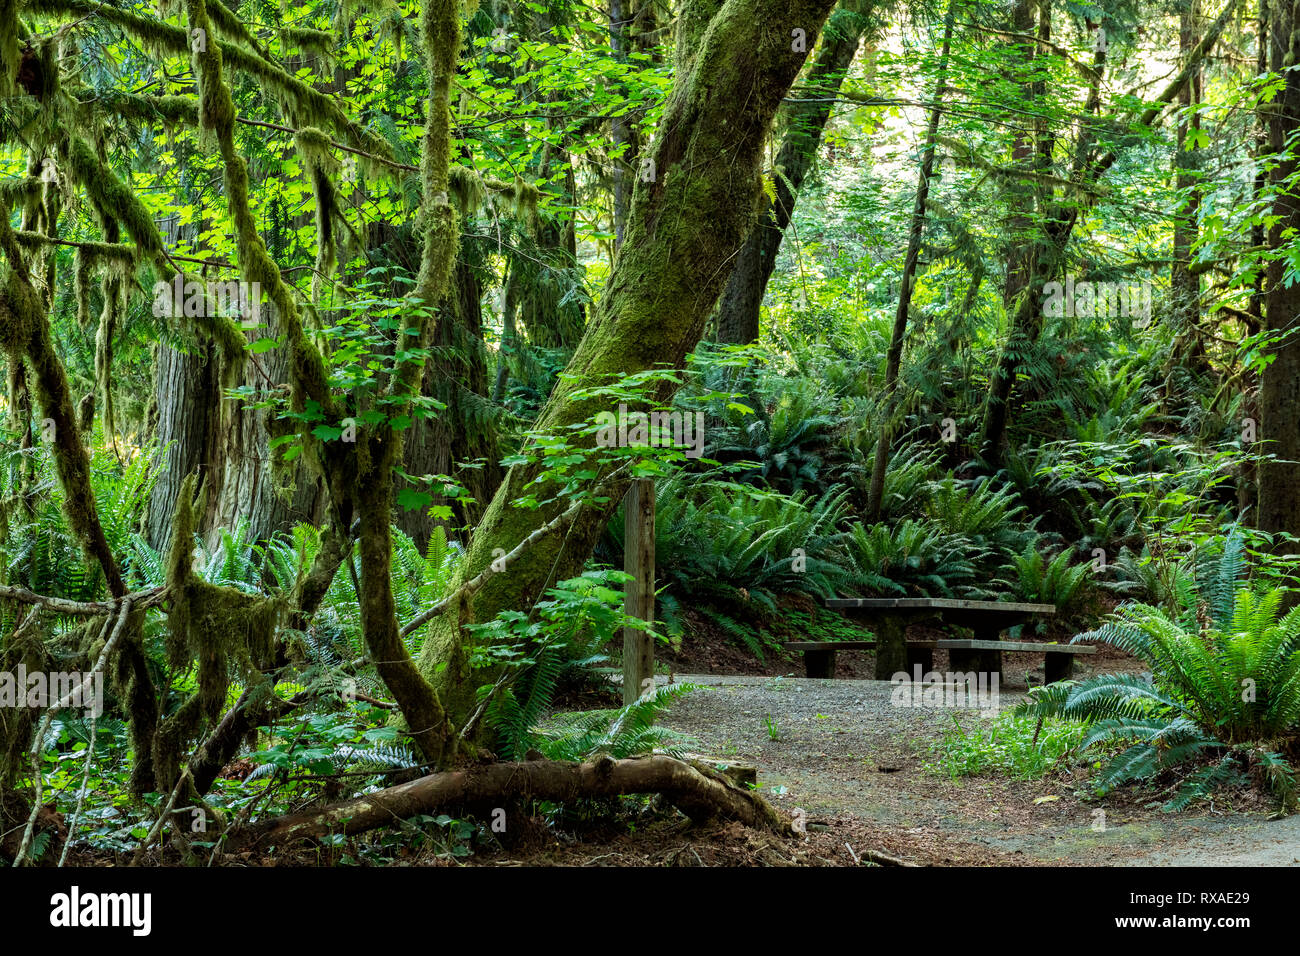 Falls Creek Campground, Lake Quinault Rainforest, Washington State, USA Banque D'Images